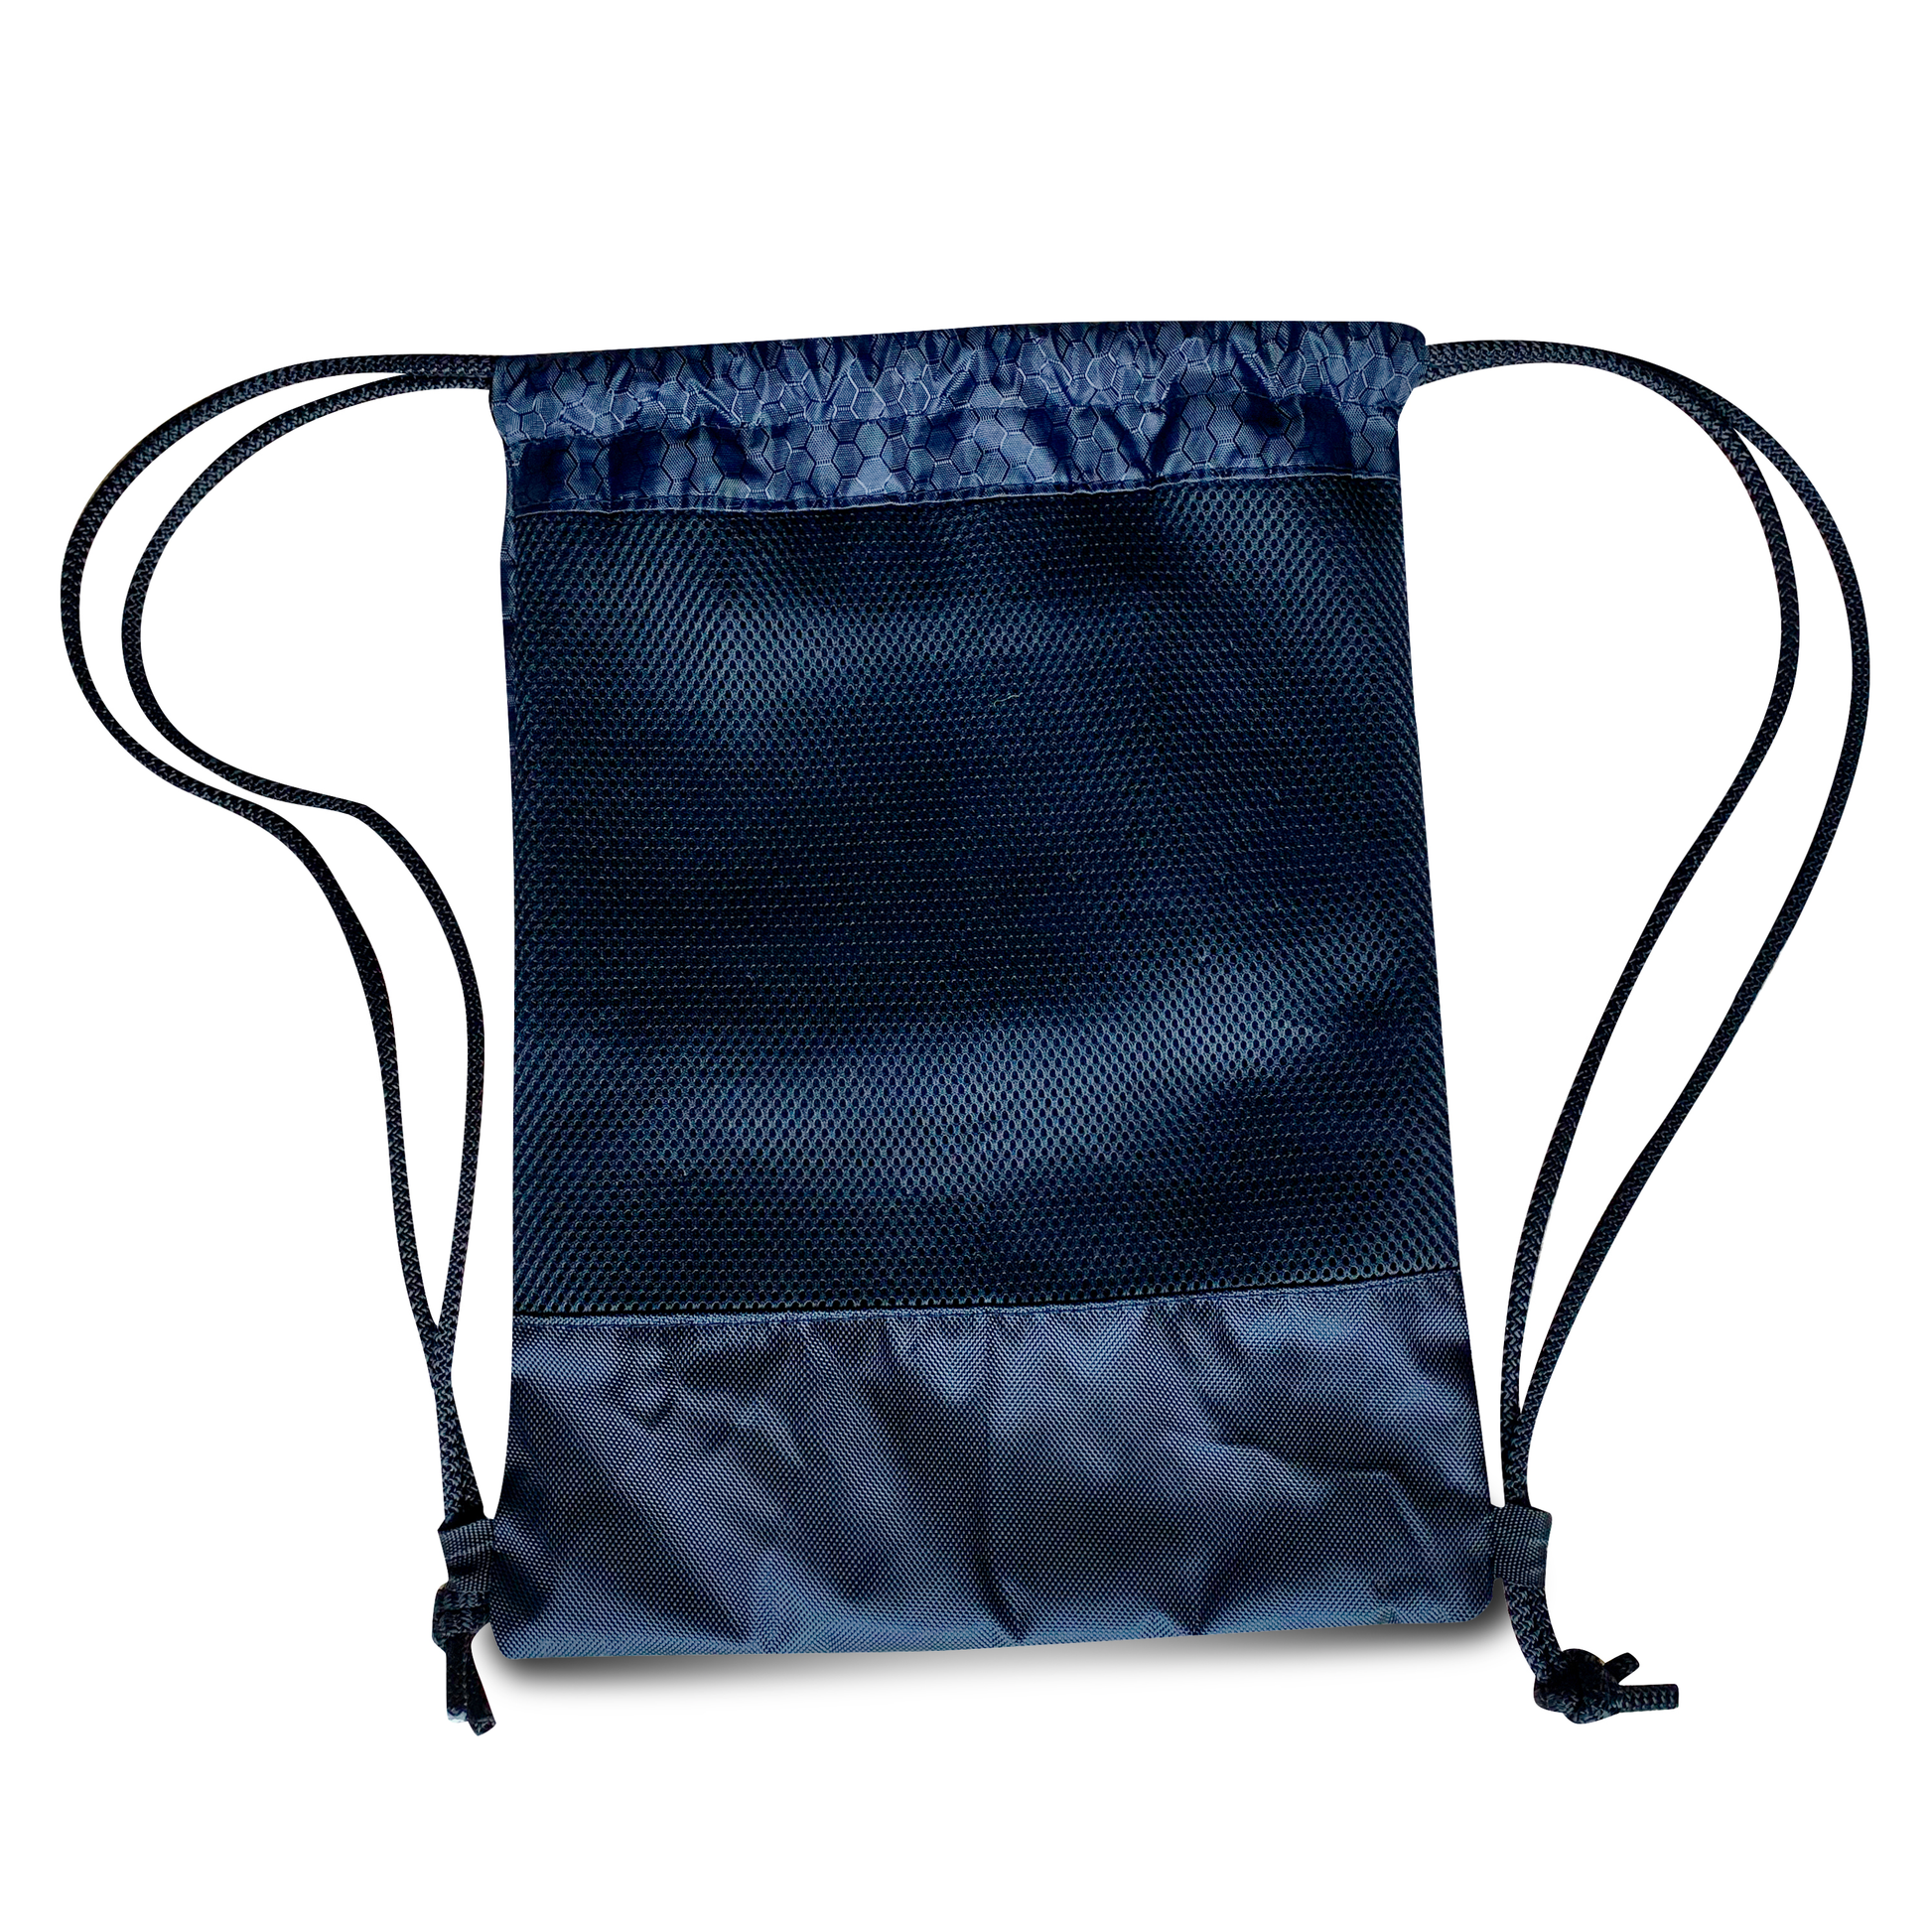 Drawstring Lacrosse Ball Bag perfect for gym or school as well